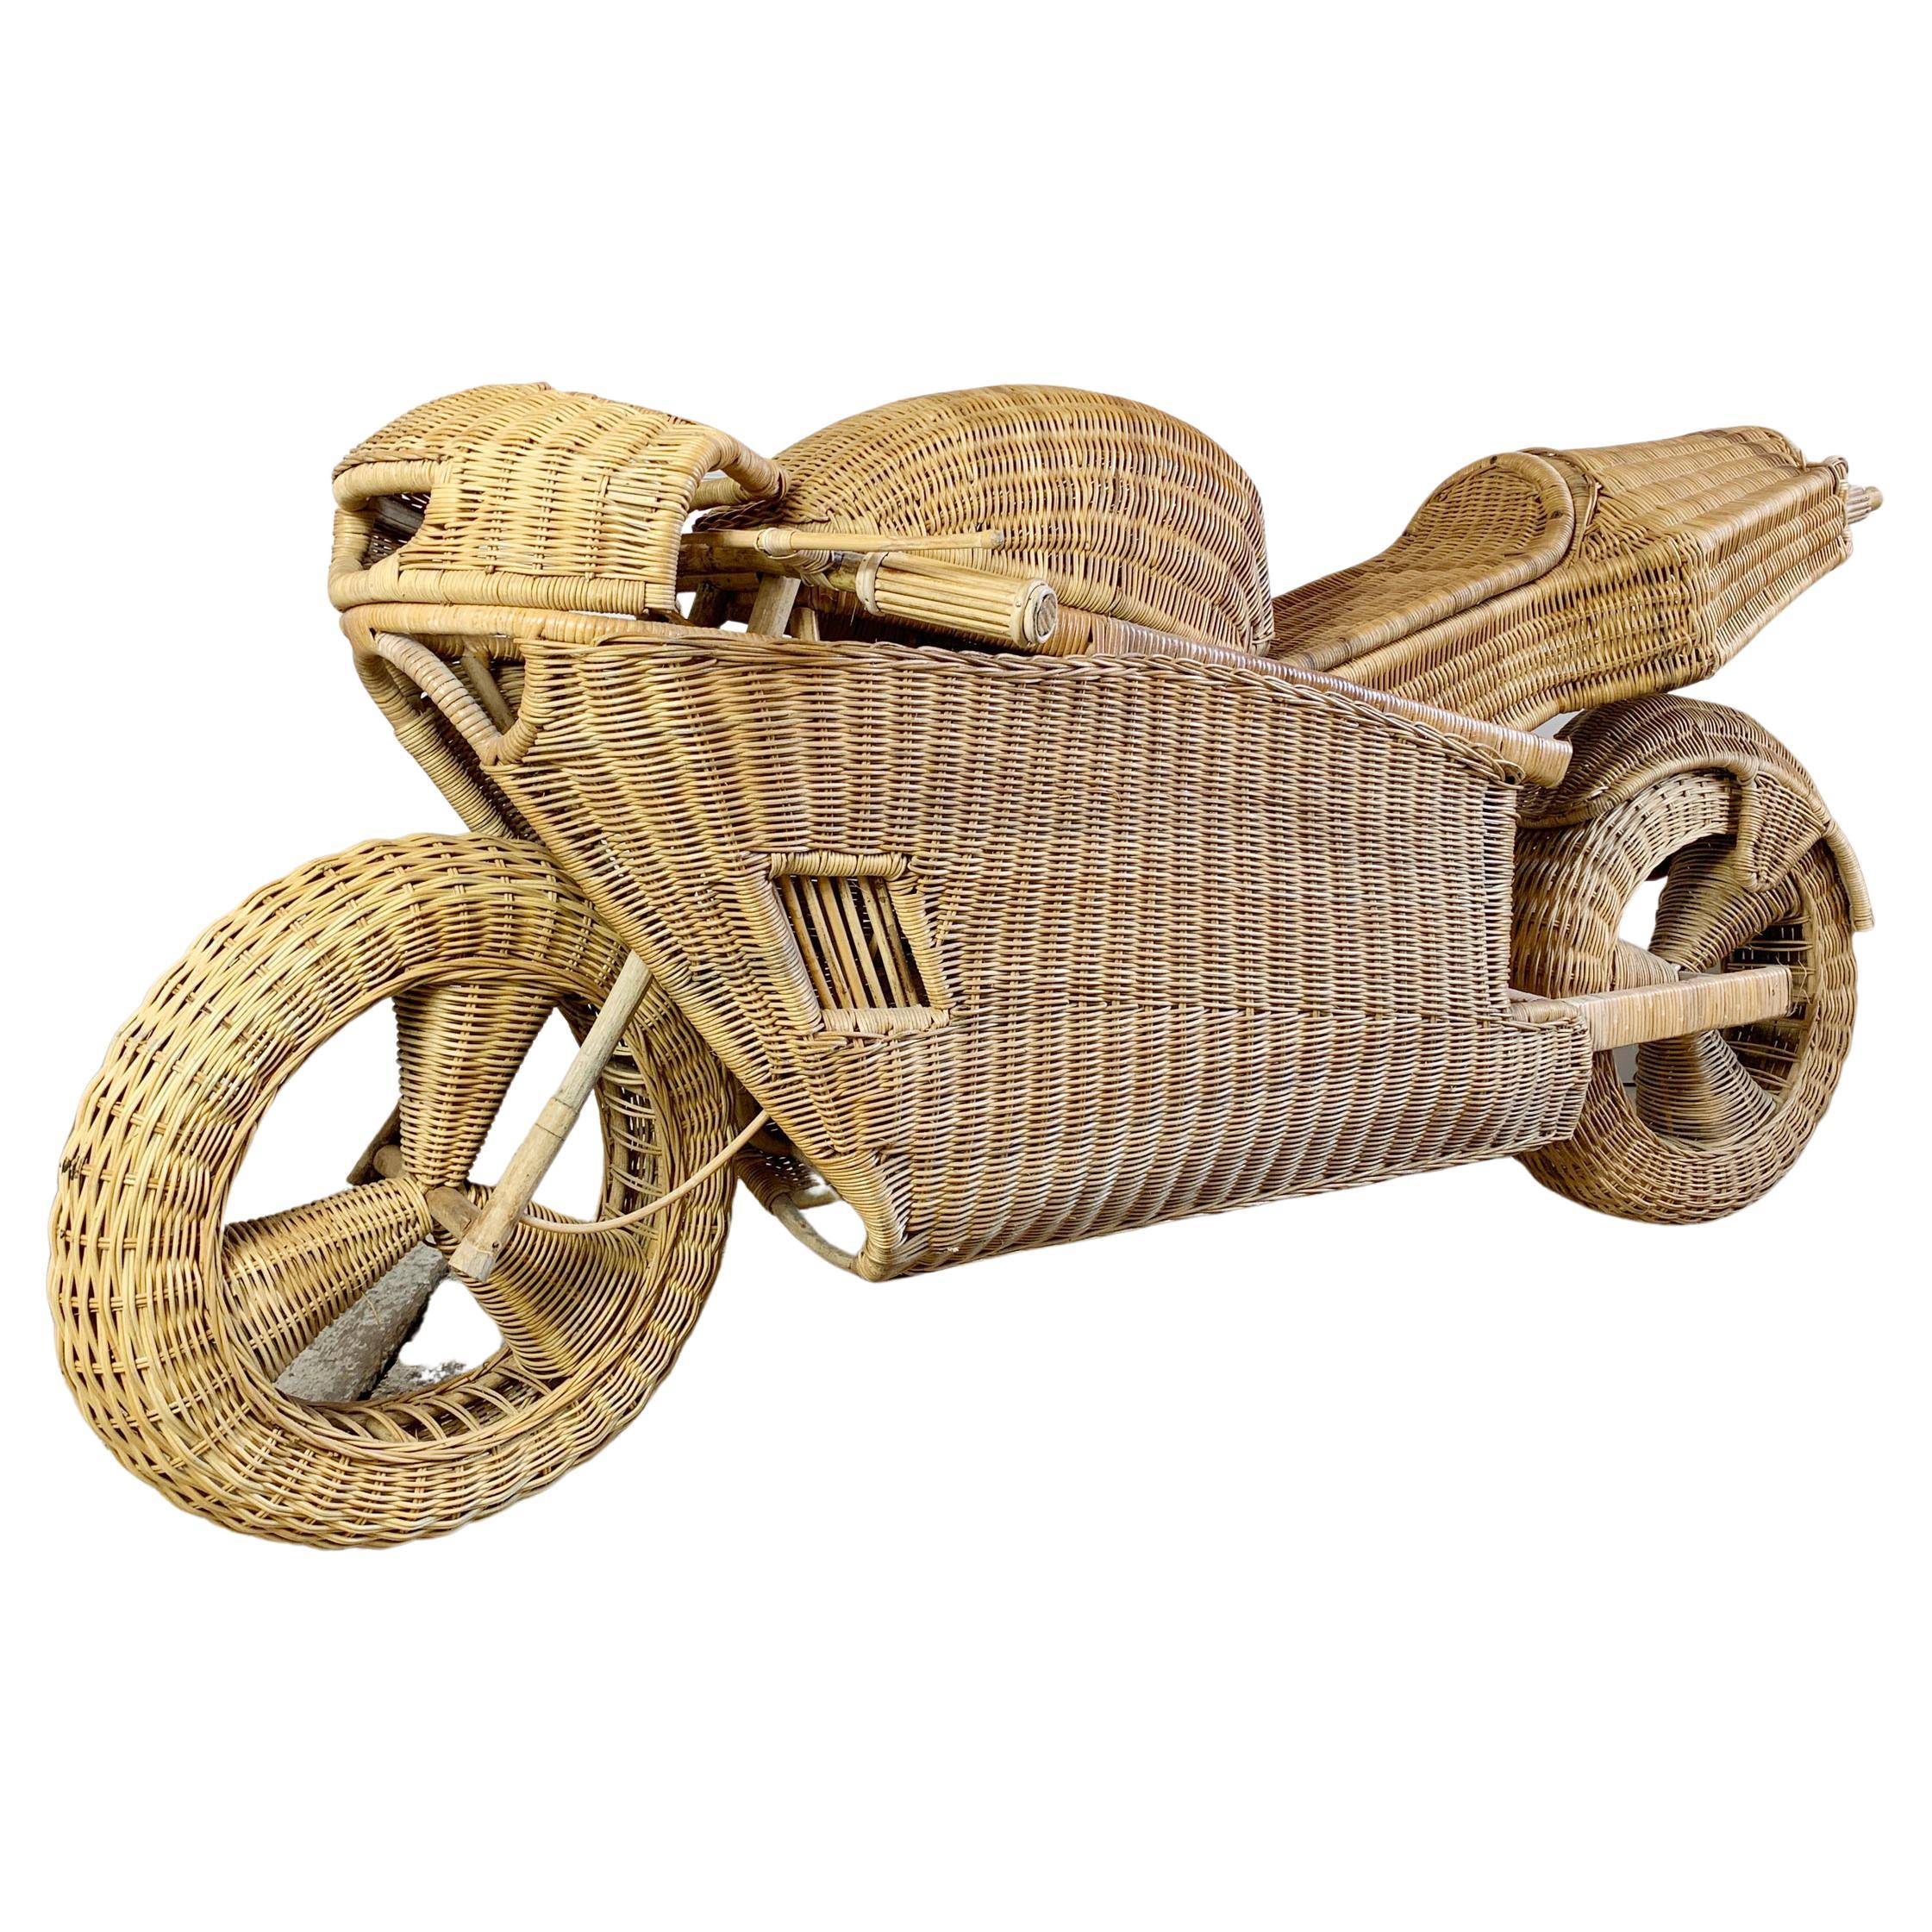 Exceptional Life Size Wicker and Bamboo Racing Motorcycle For Sale